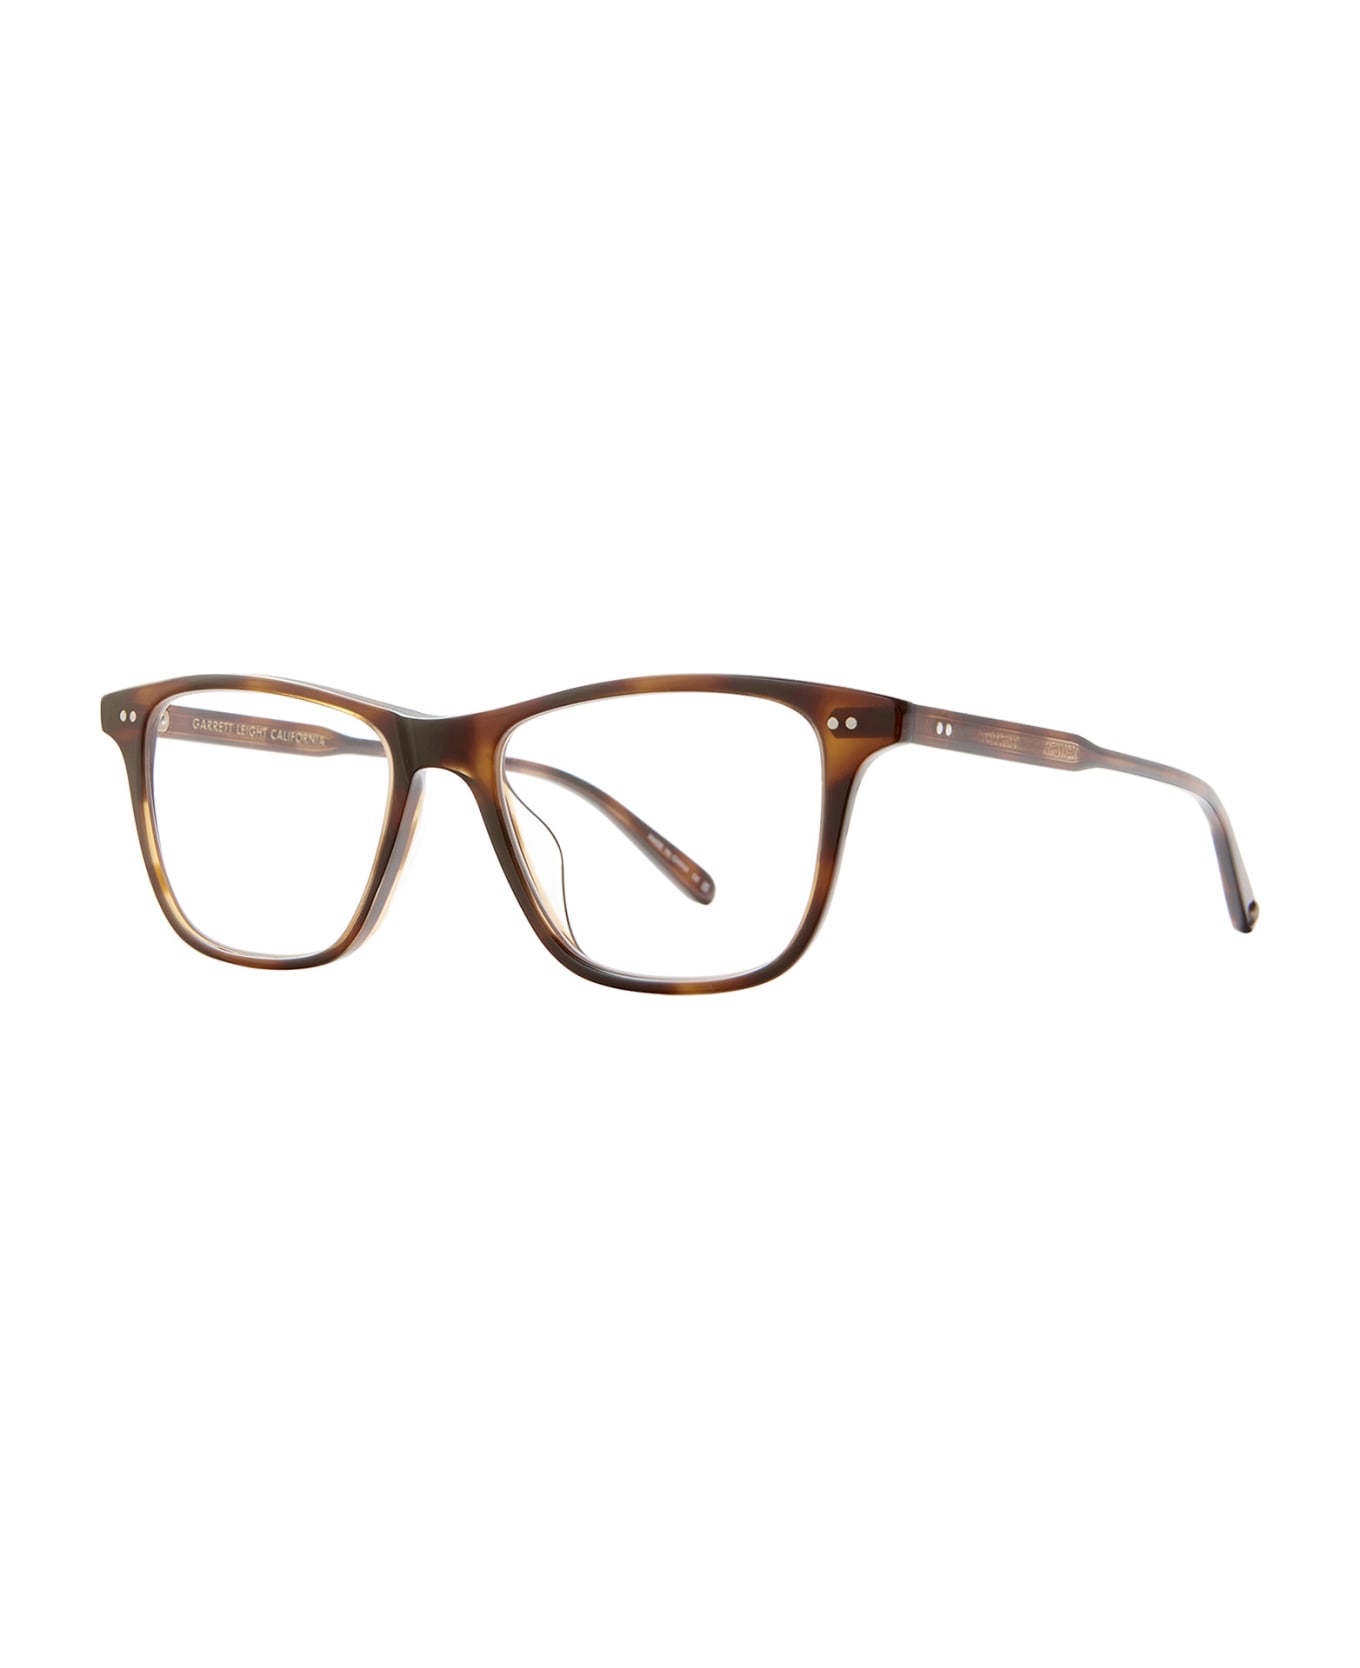 Garrett Leight Hayes Spotted Brown Shell Glasses - Spotted Brown Shell